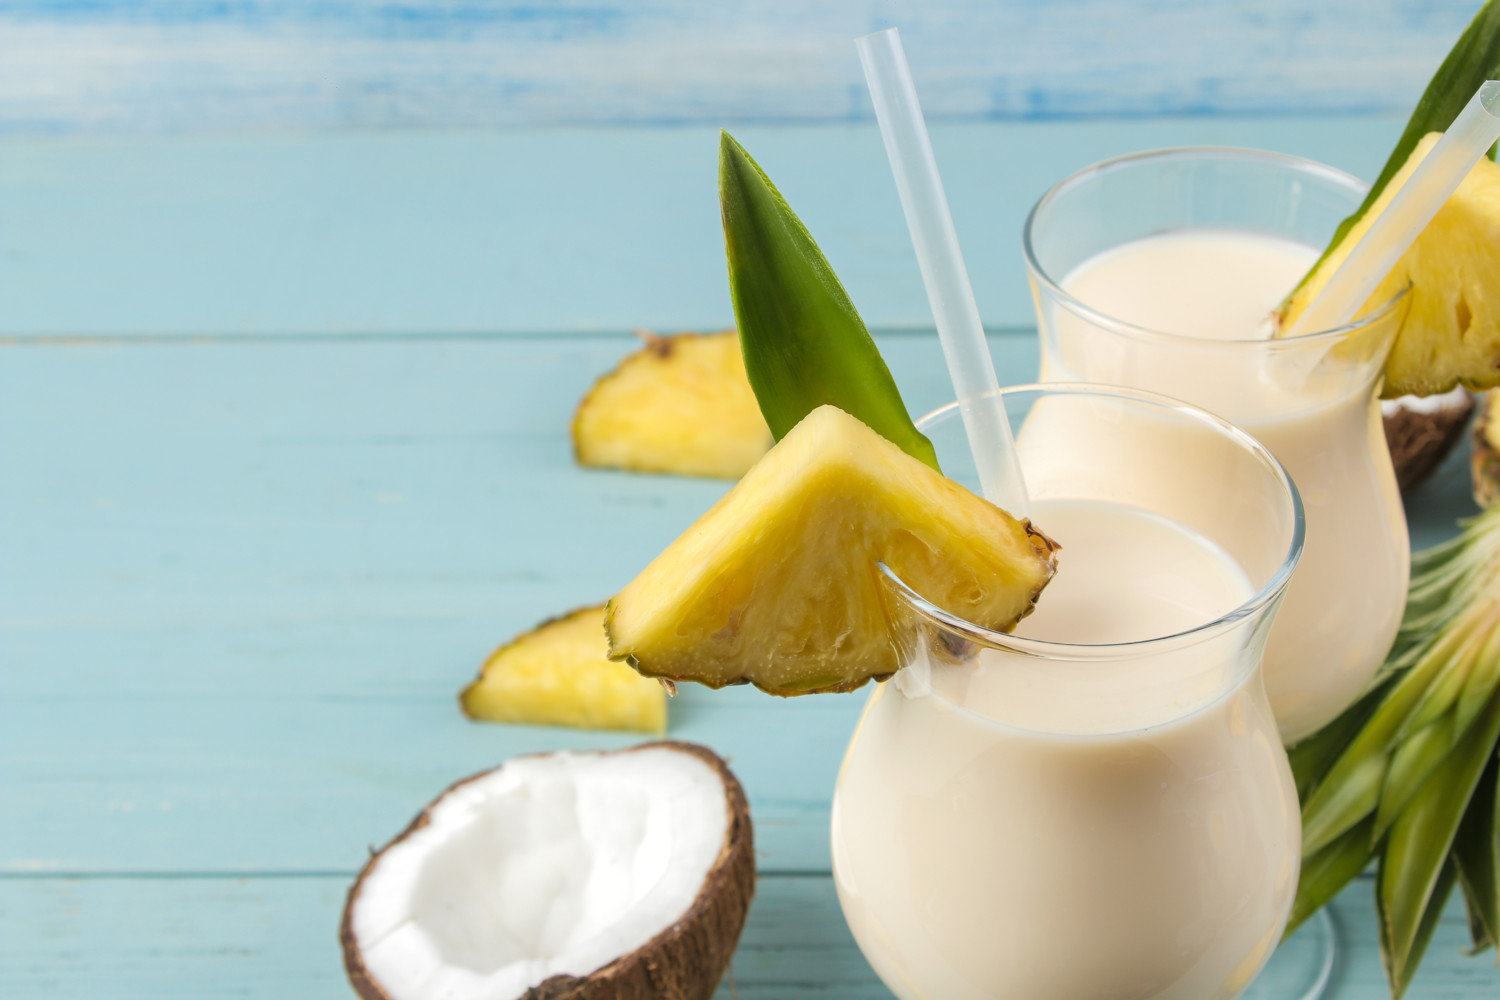 pina colada - one of the most popular cocktails in the world